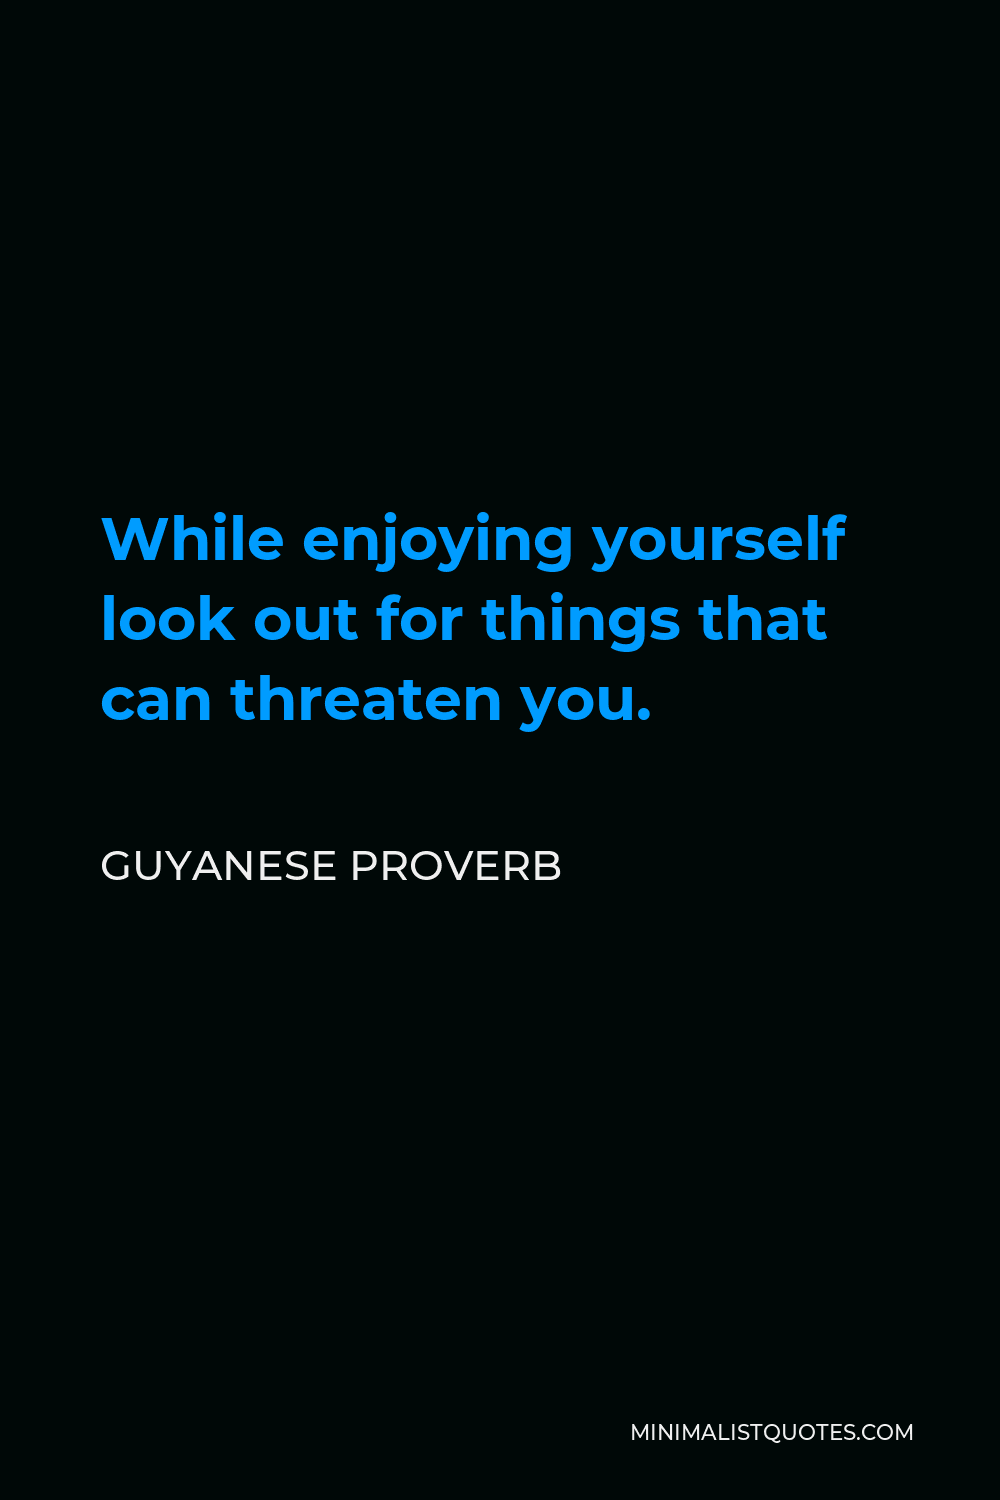 Guyanese Proverb Quote - While enjoying yourself look out for things that can threaten you.